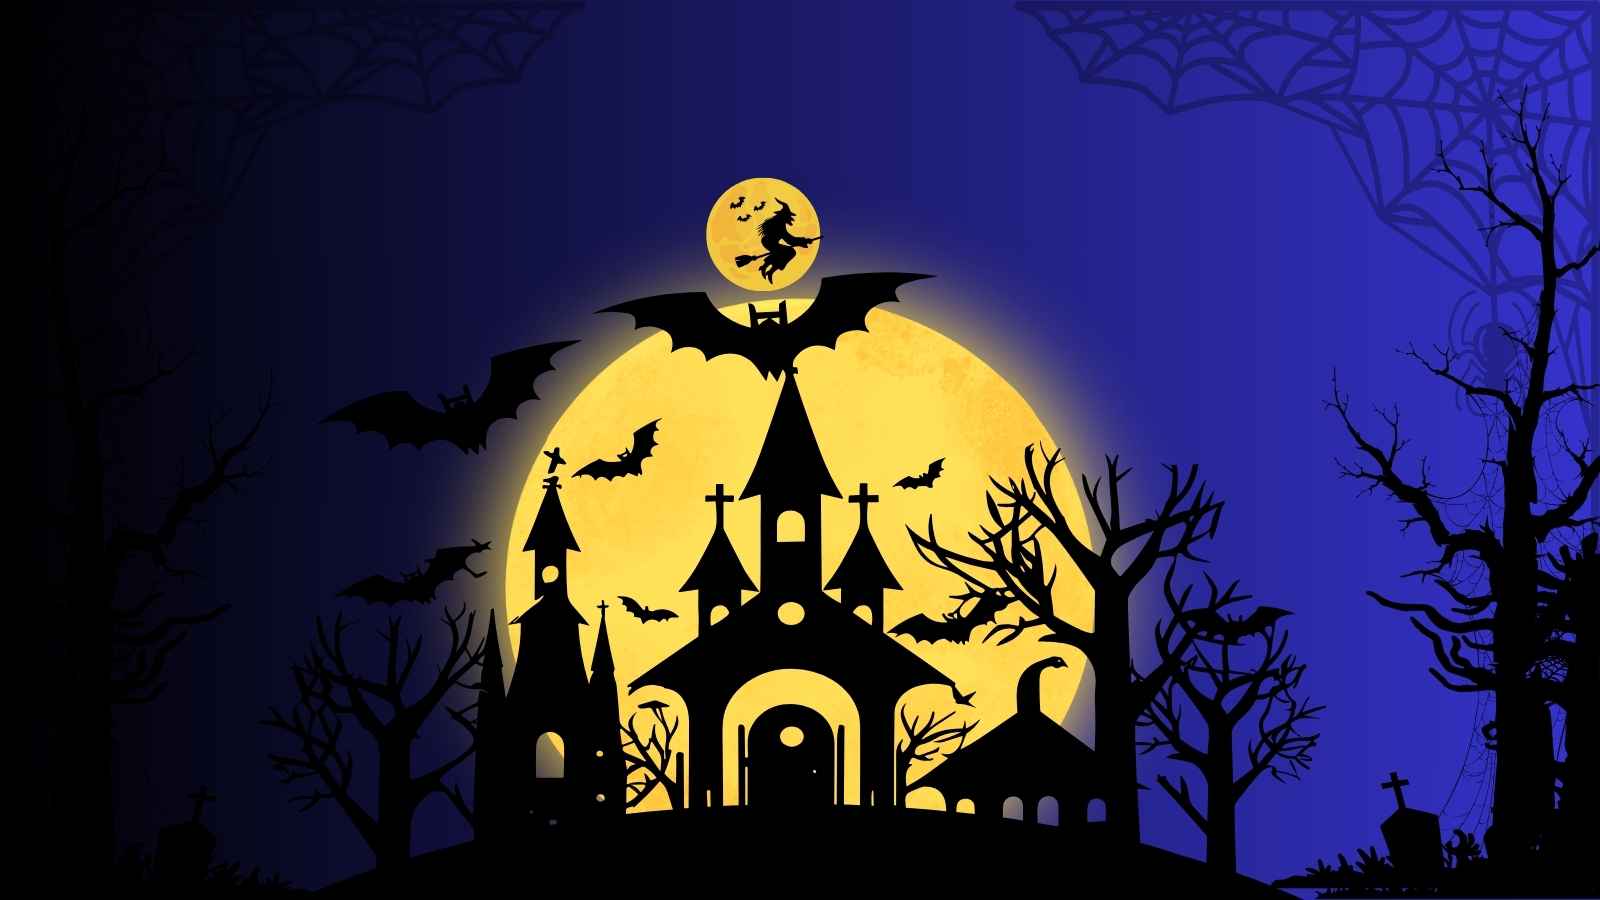 Bitdeal Unveils Halloween Treat:  Grab Fang-tastic Discounts up to 60% On All Services!